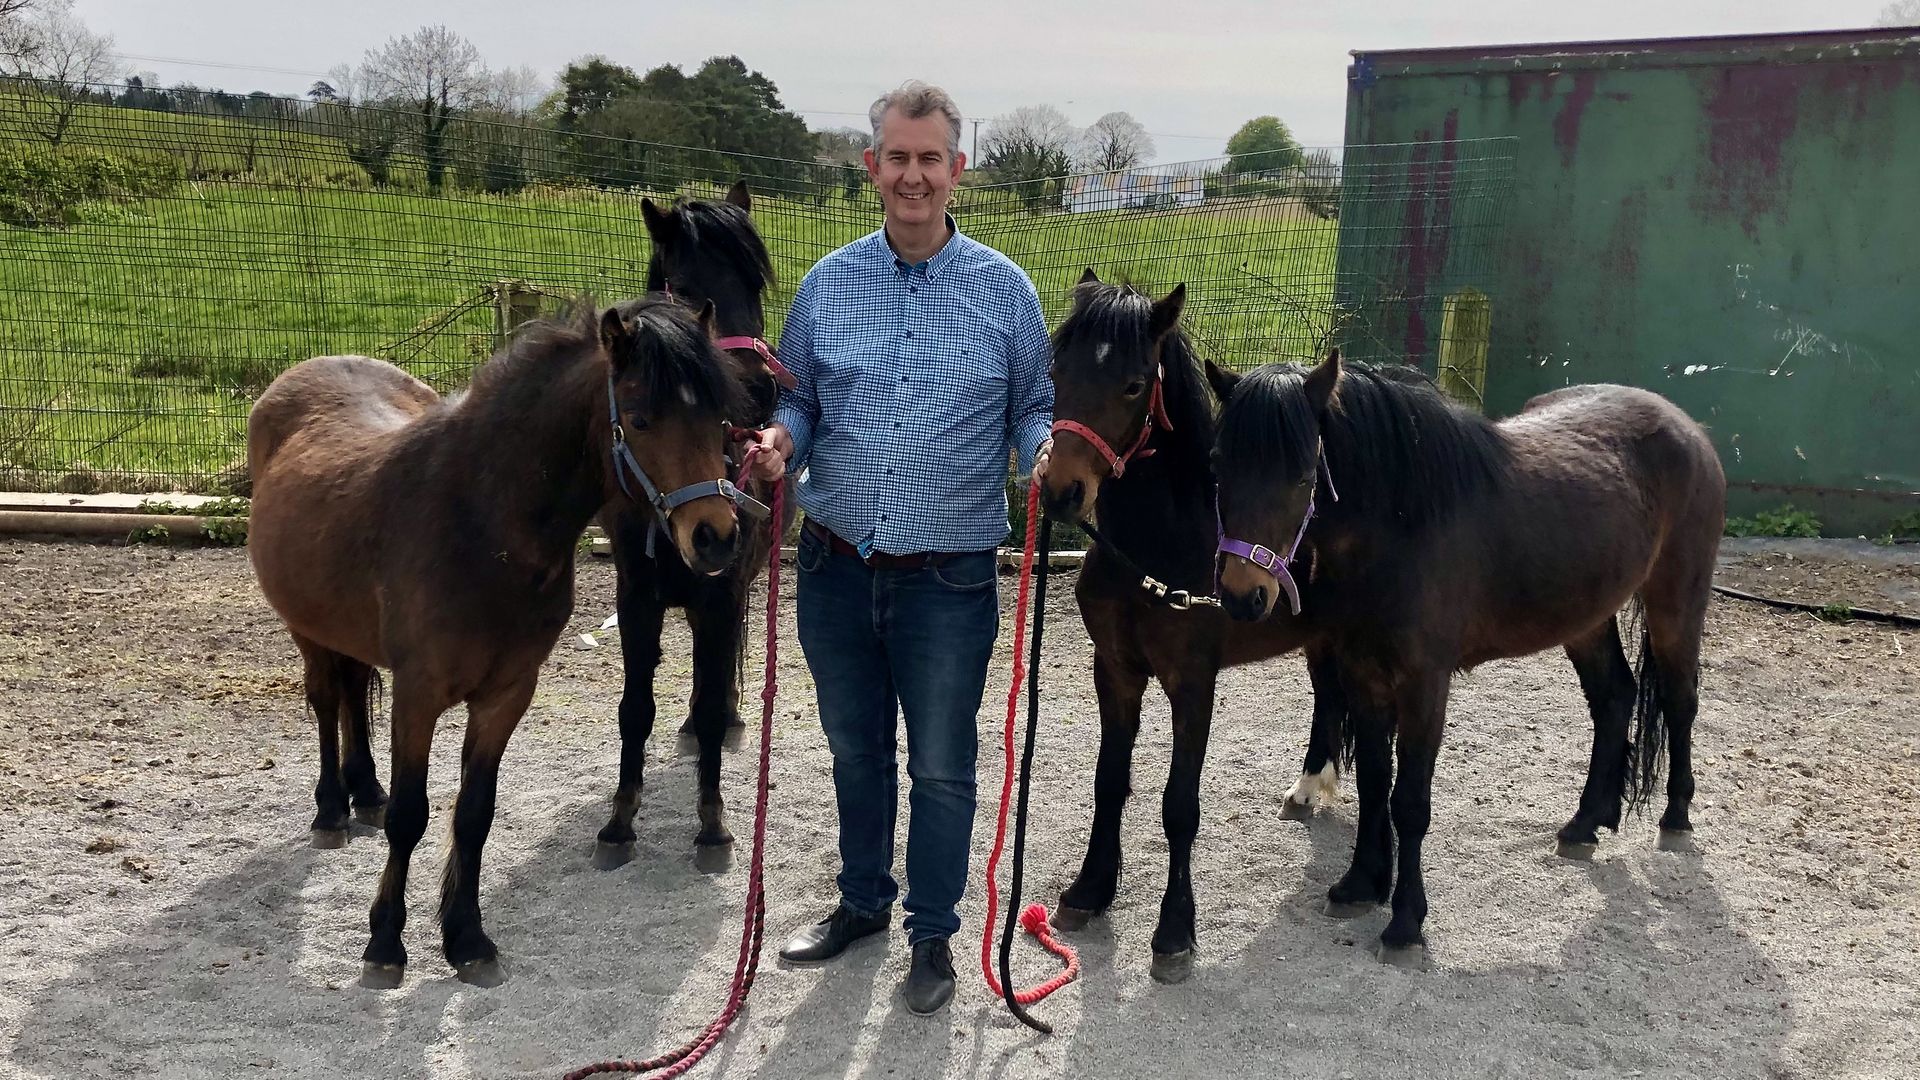 The DUP's Edwin Poots with the ponies at Ashleigh Massey's farm near Ballygowan, Co Down - Credit: PA